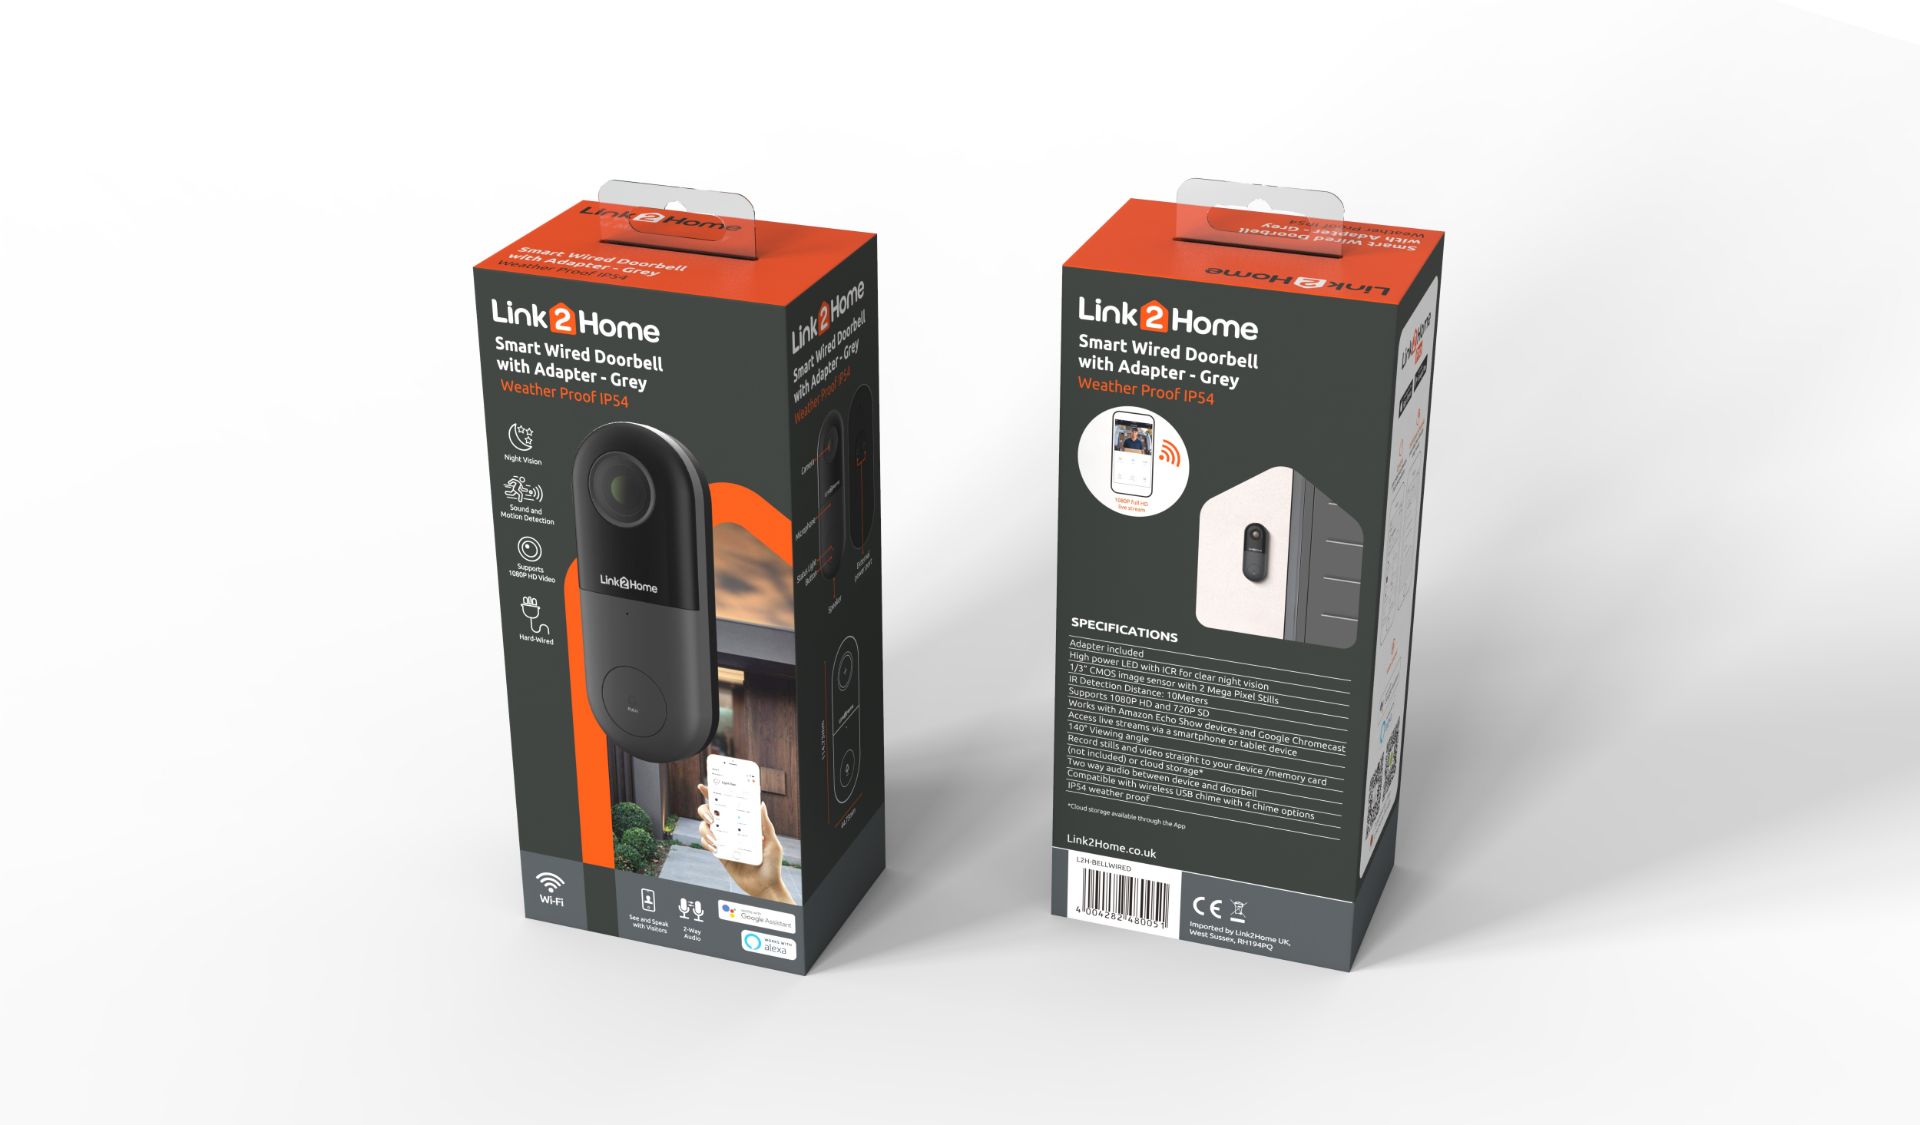 20 x Link2Home 'L2H BellWired' Hard Wired Doorbells/Cameras - New, boxed stock RRP £99.99 each. - Image 7 of 15